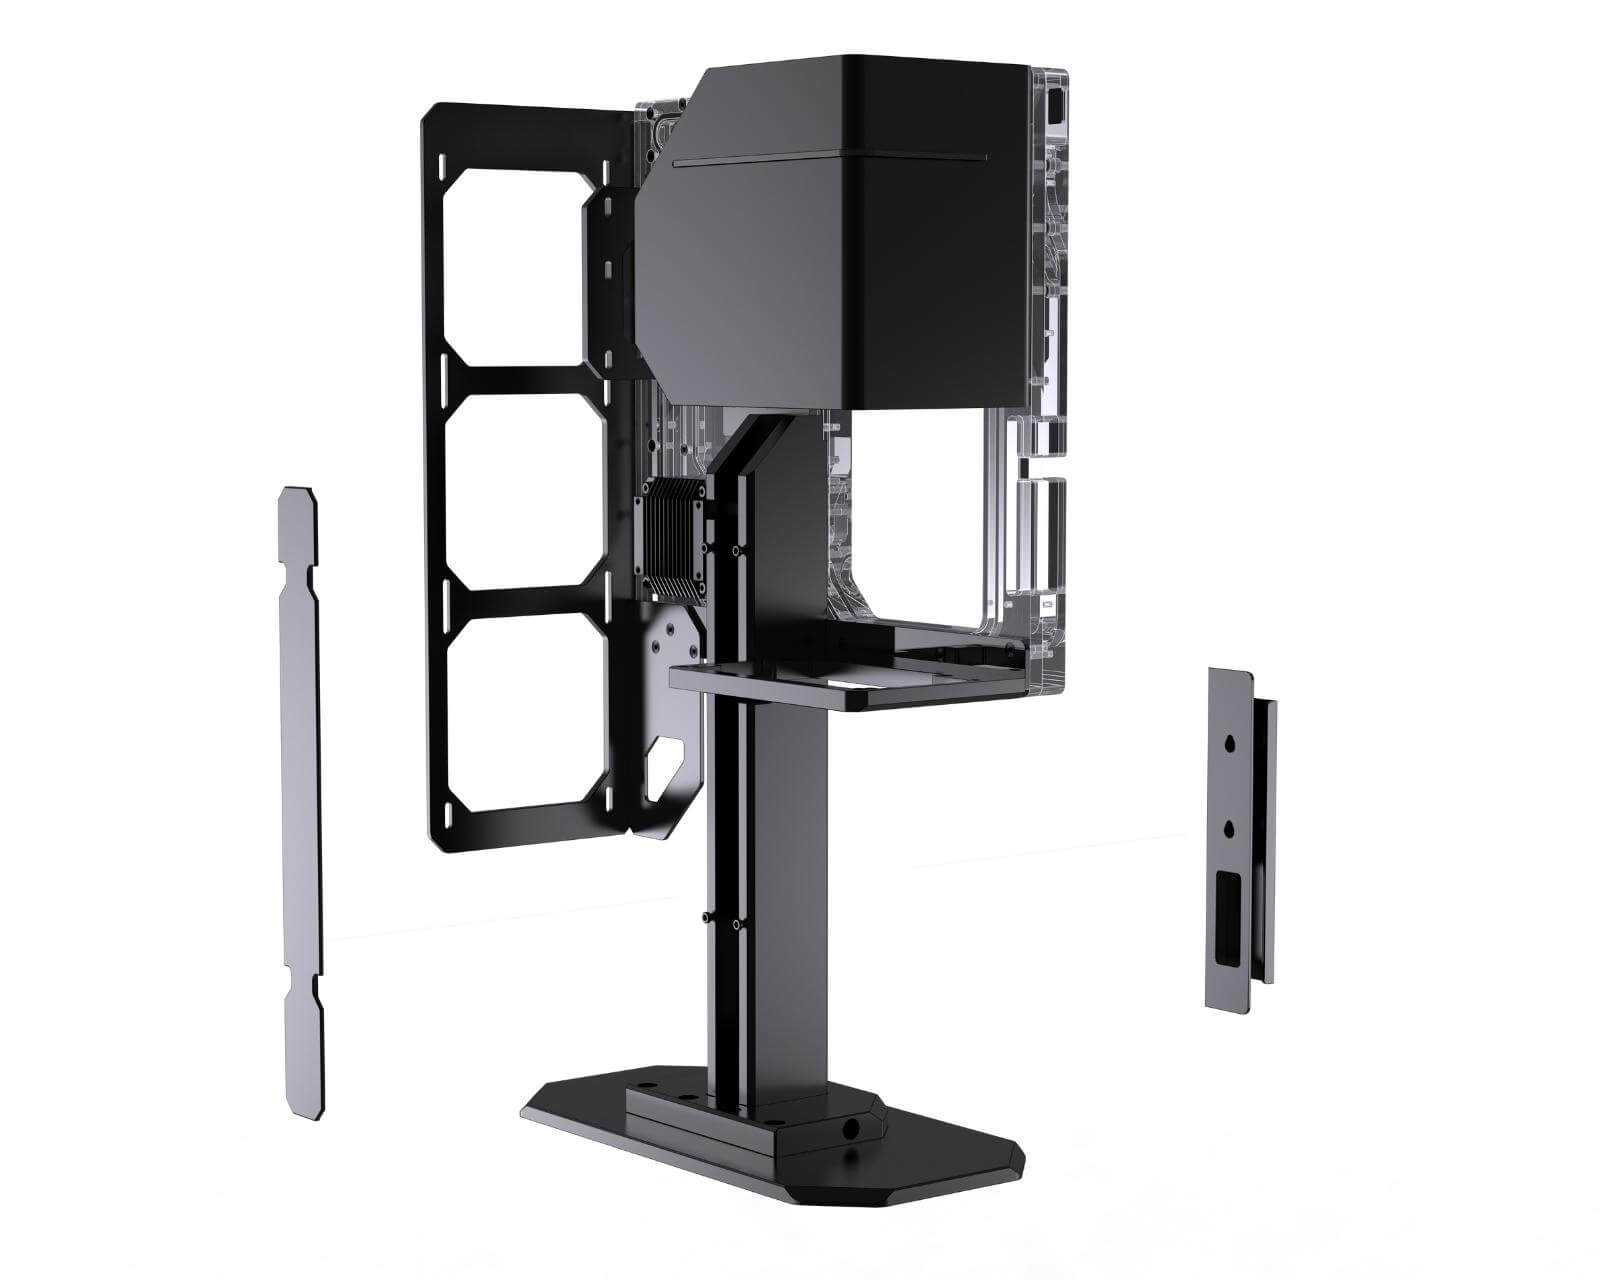 Granzon G10 External Expansion Water Cooling Open Frame Chassis for ITX / MATX / ATX Motherboards (G10) - PrimoChill - KEEPING IT COOL